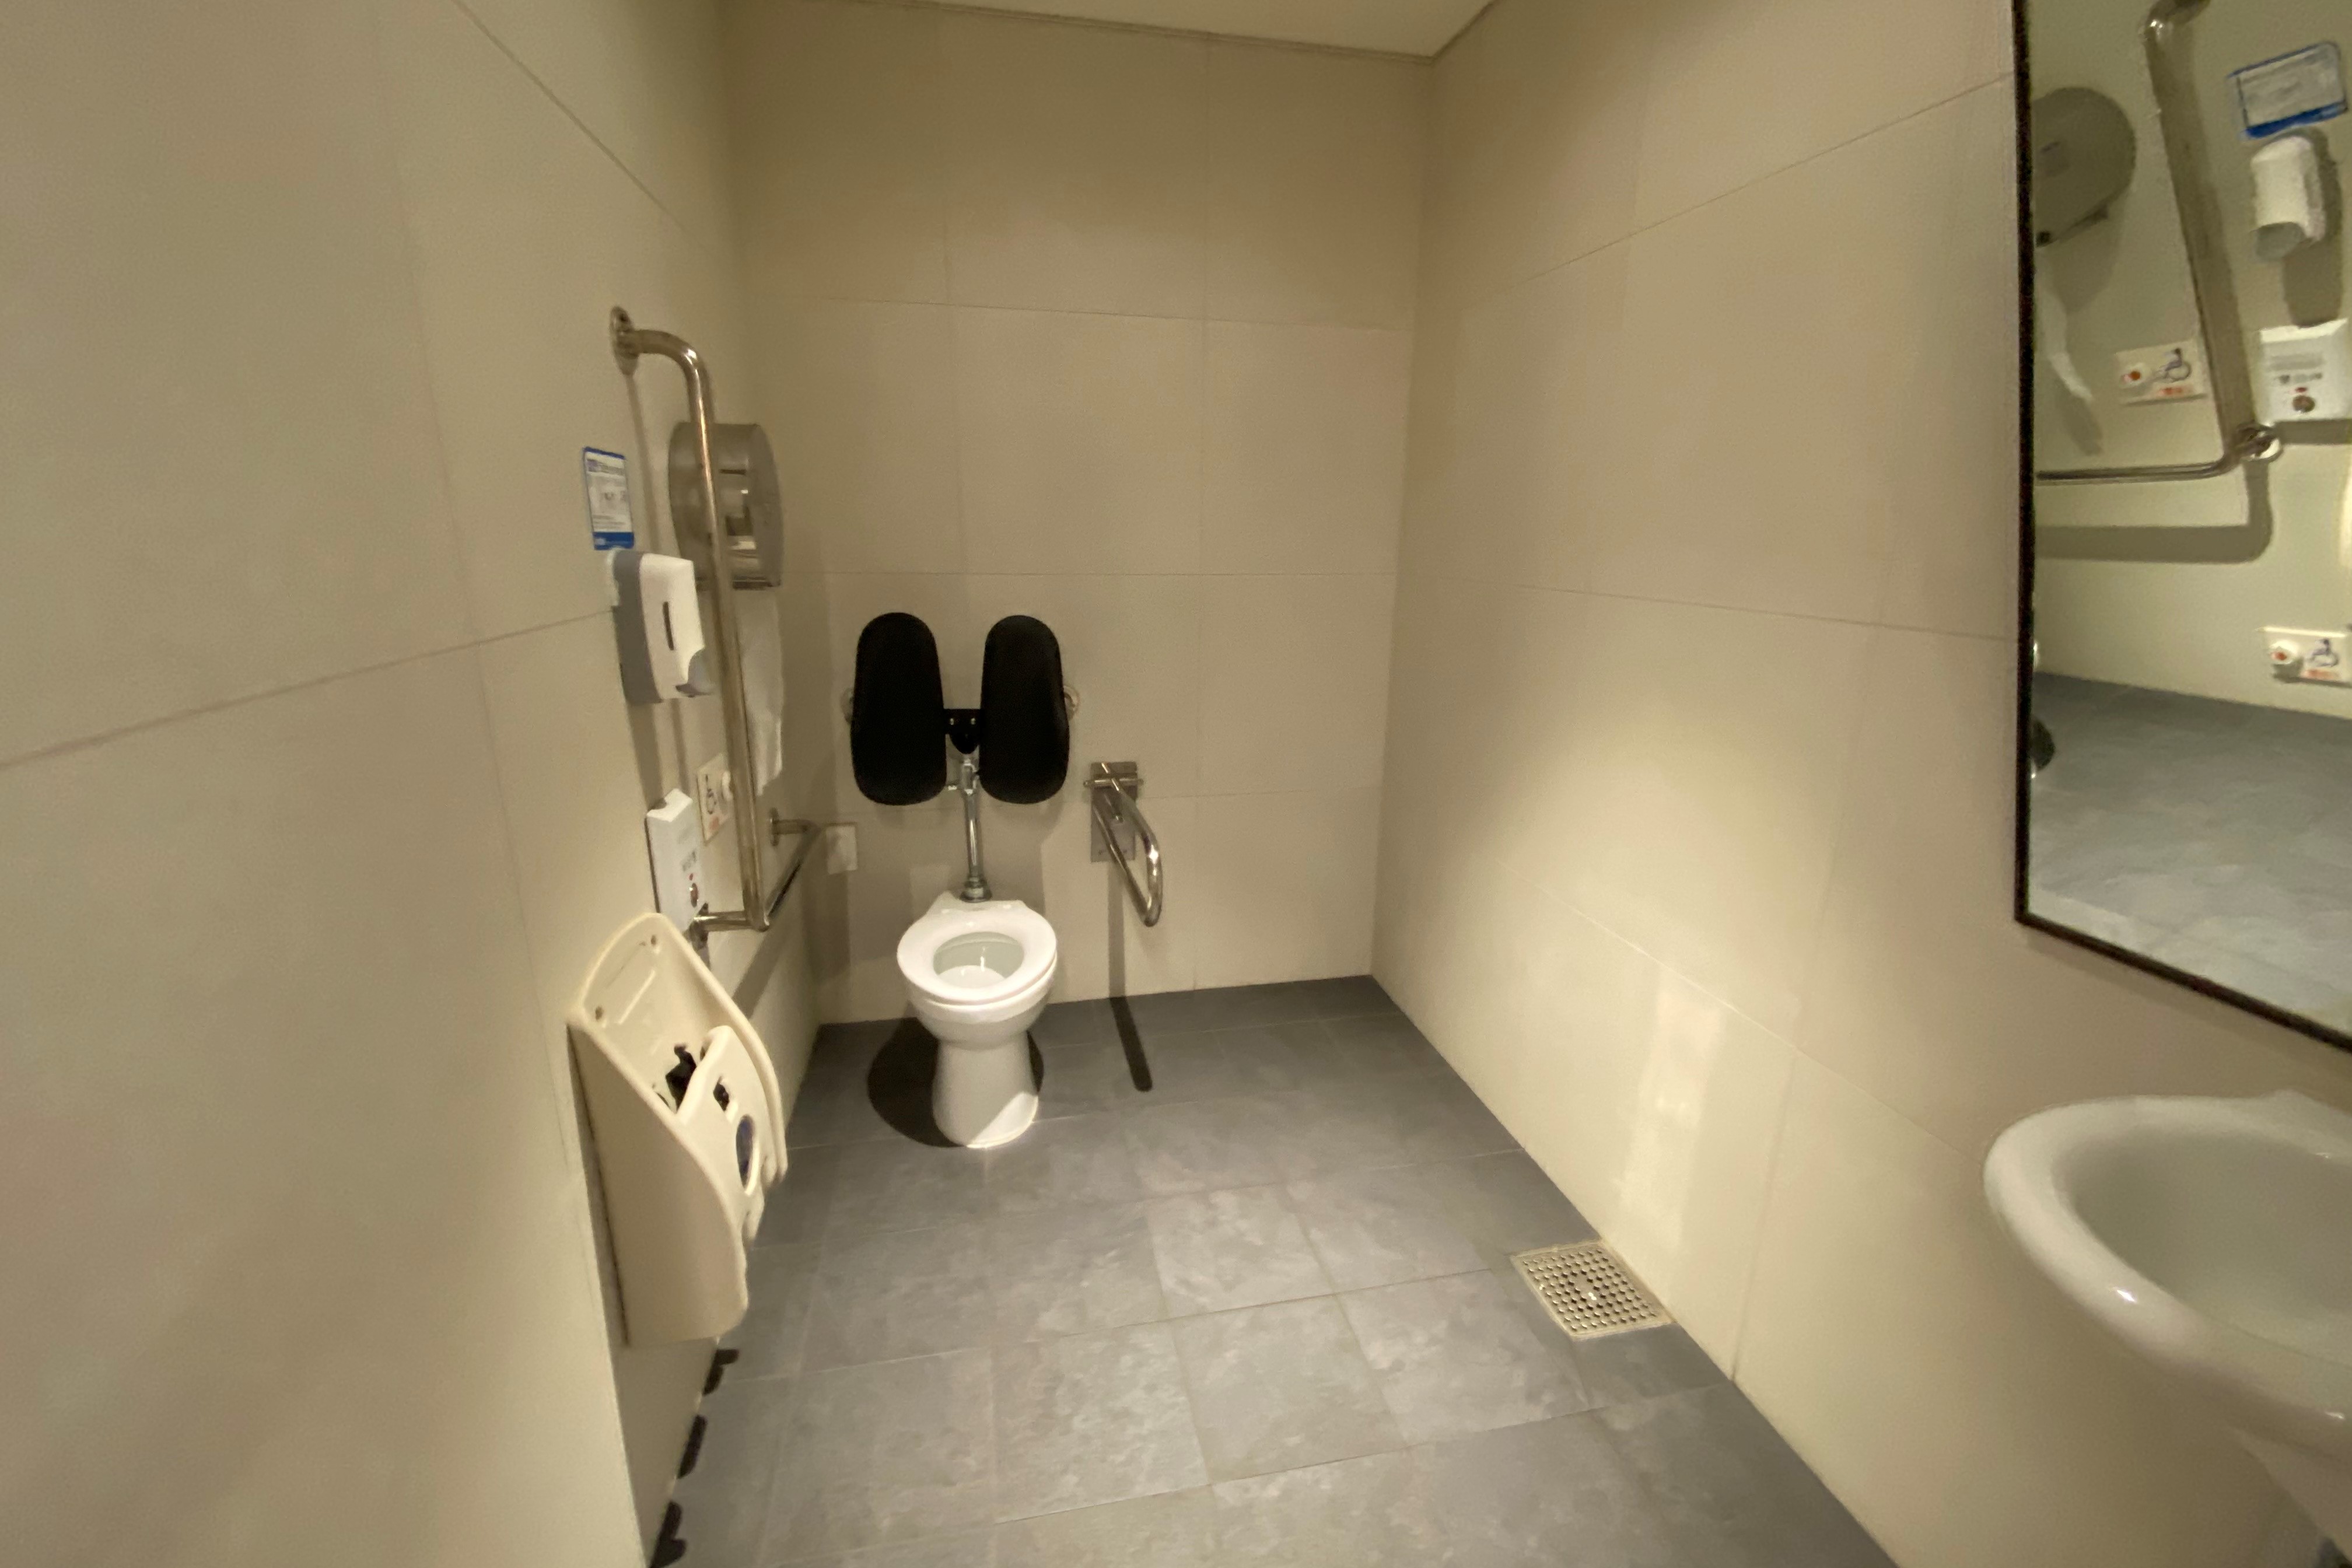 Accessible restroom for persons with disabilities0 : Interior view of a spacious accessible restroom